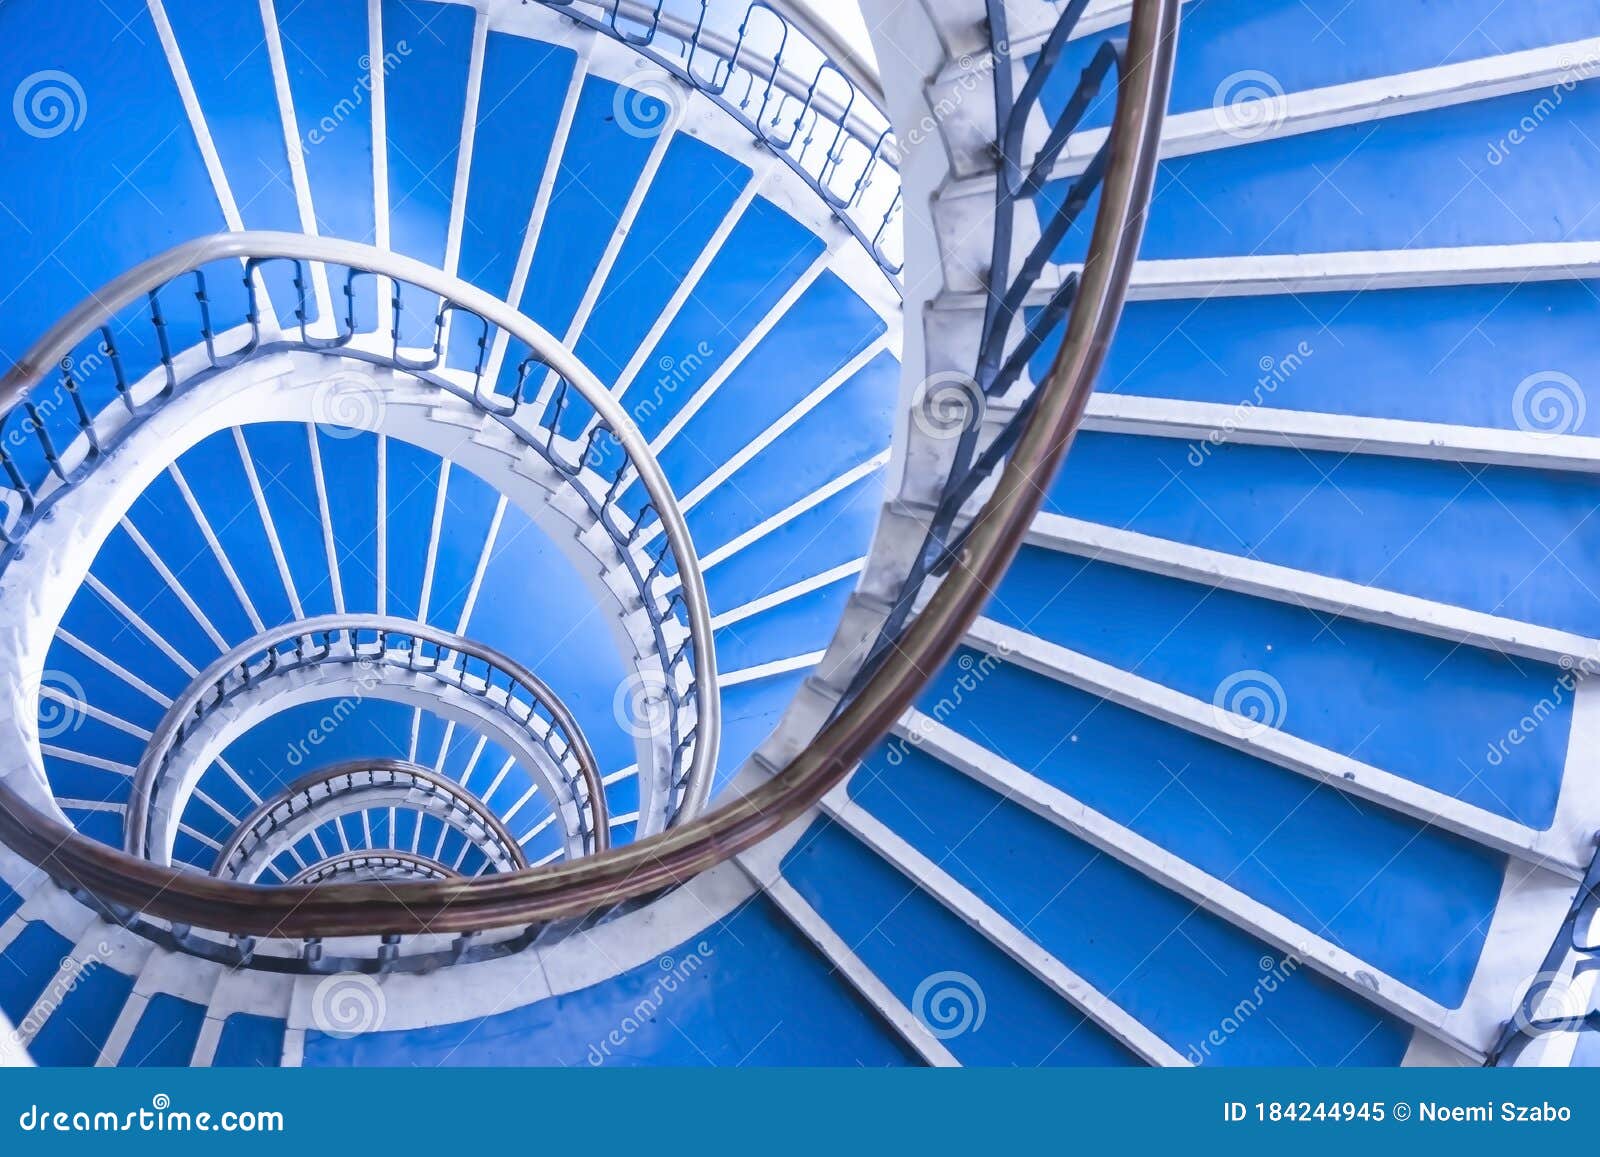 modern abstract spiral staircase, bauhaus style, blue and white staircase